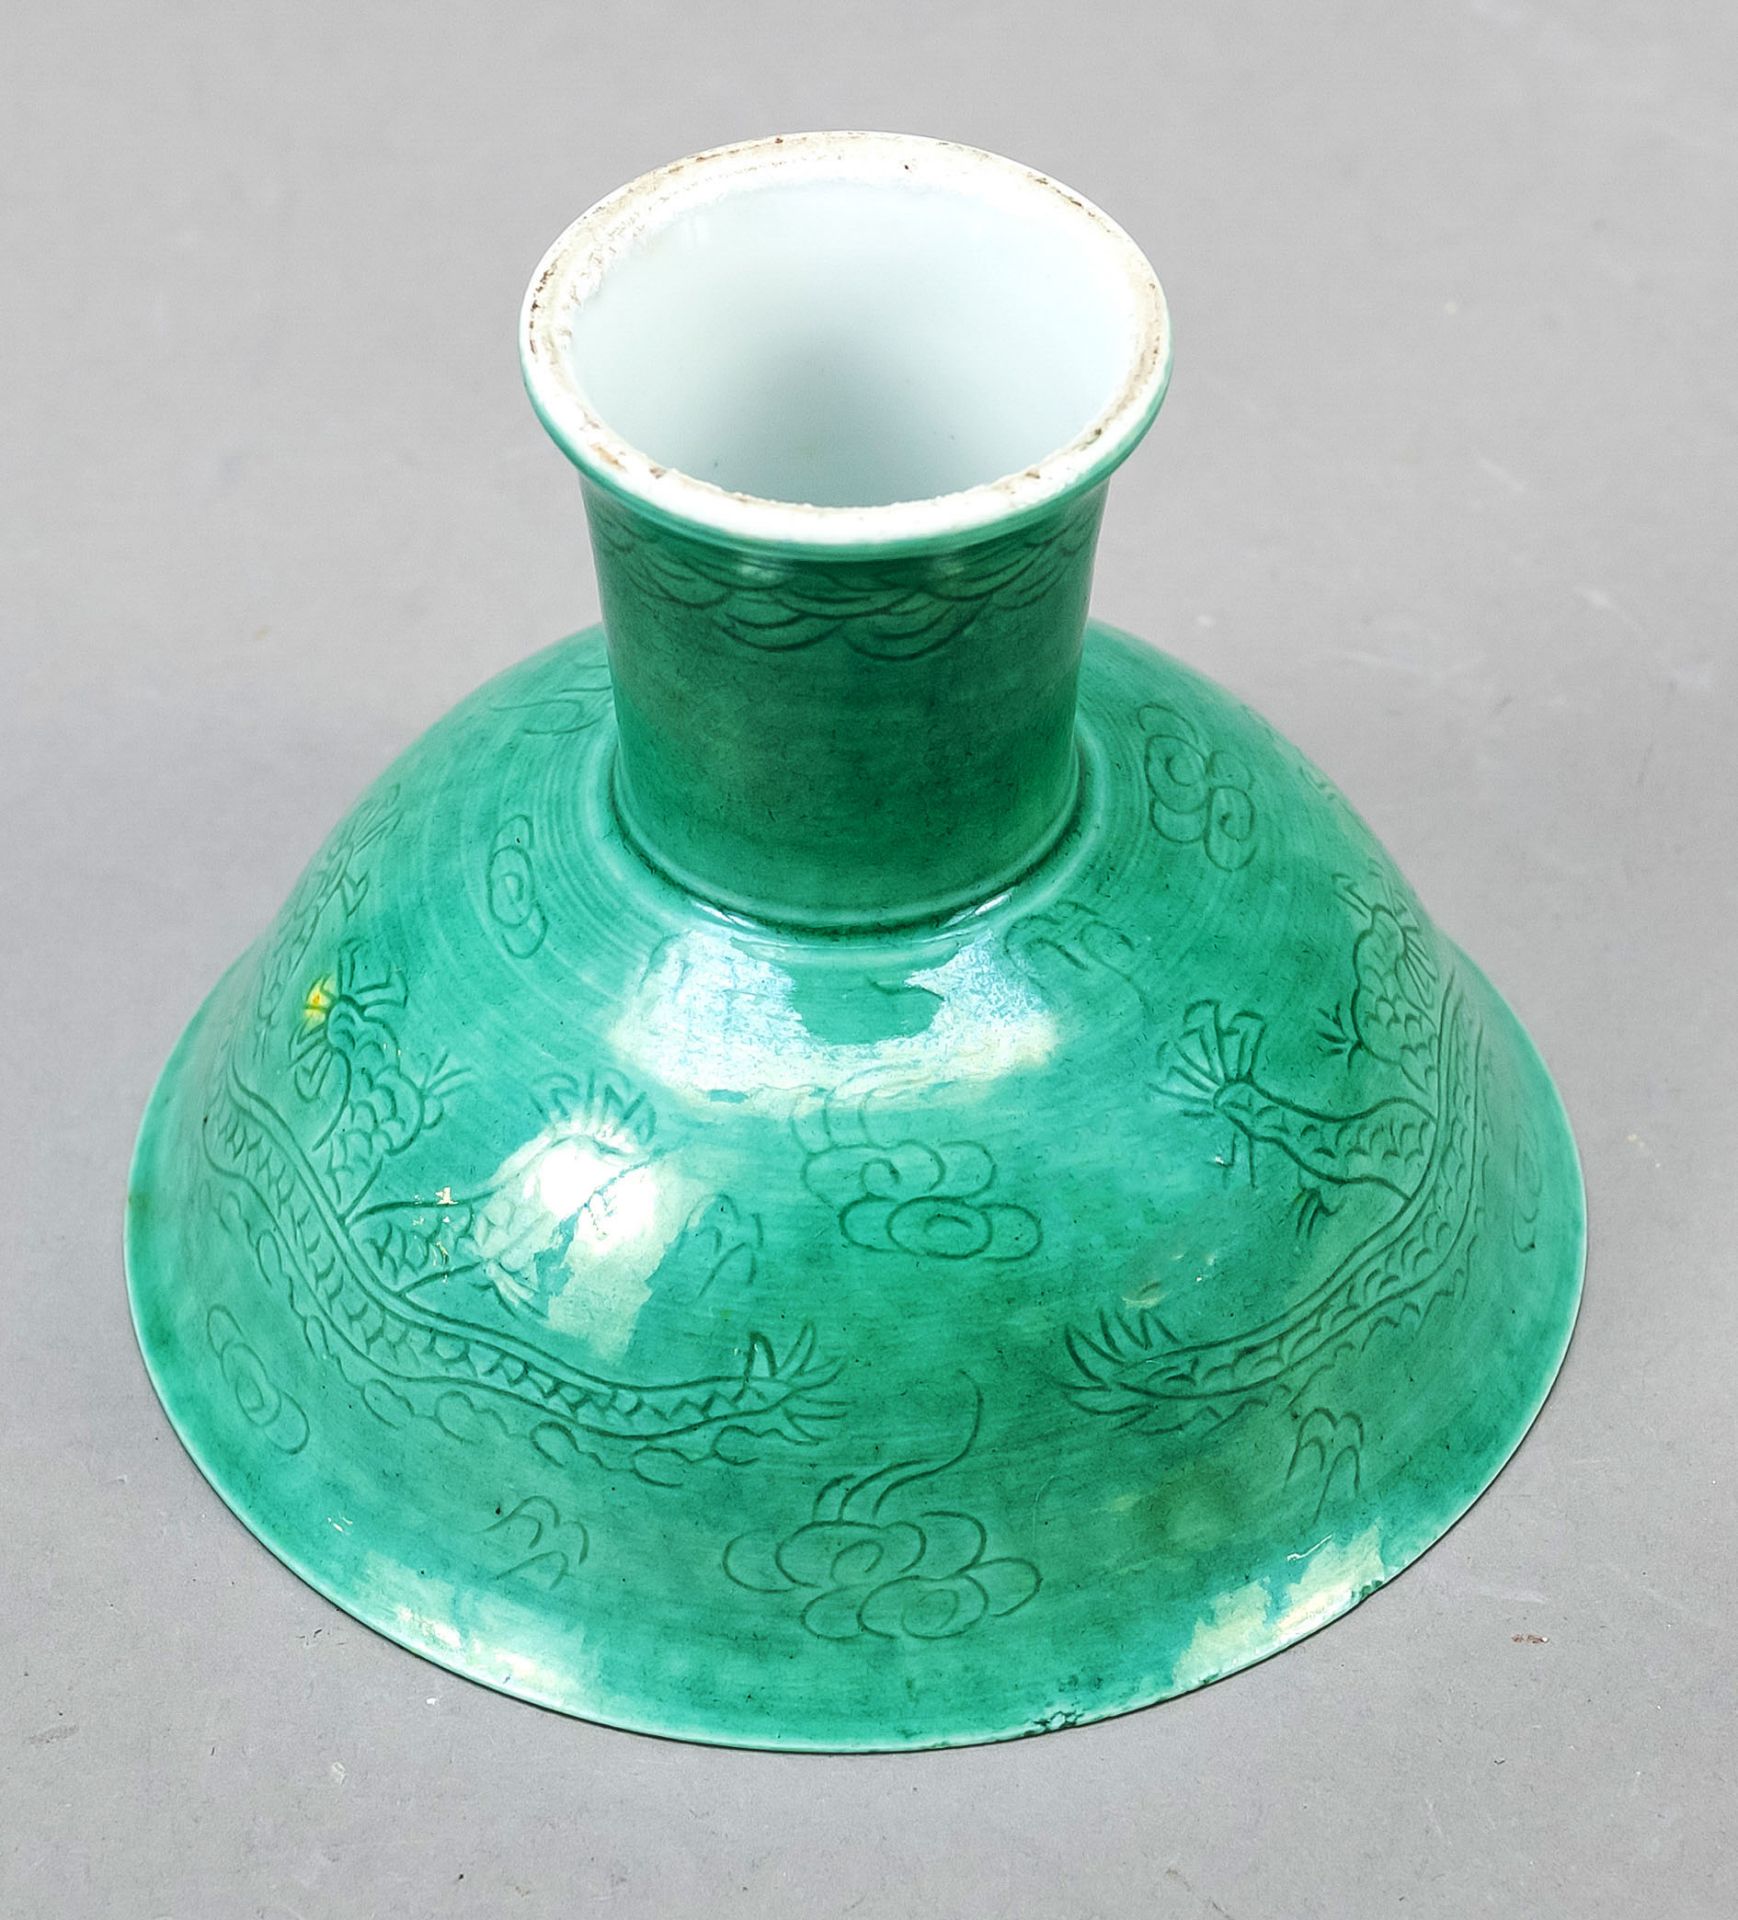 Very rare green goblet with hidden decoration, China, Qing dynasty(1644-1911), Guangxu period(1875- - Image 3 of 4